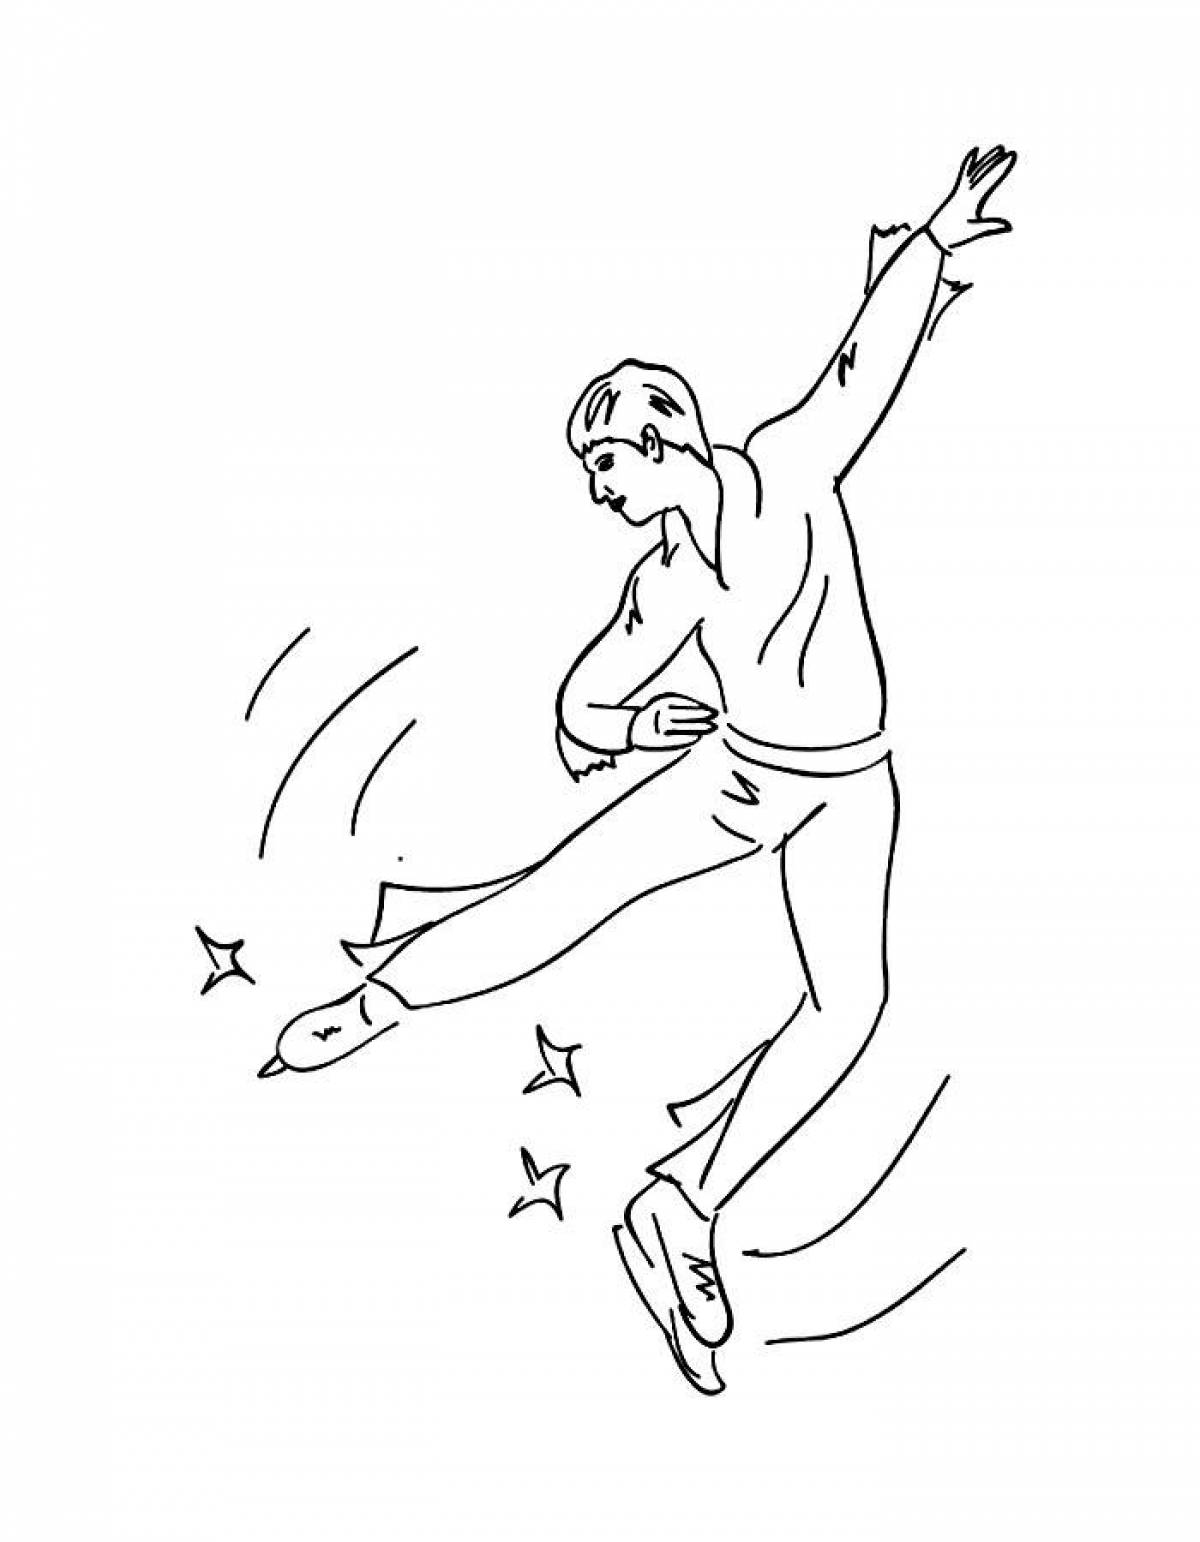 Coloring page wild figure skating